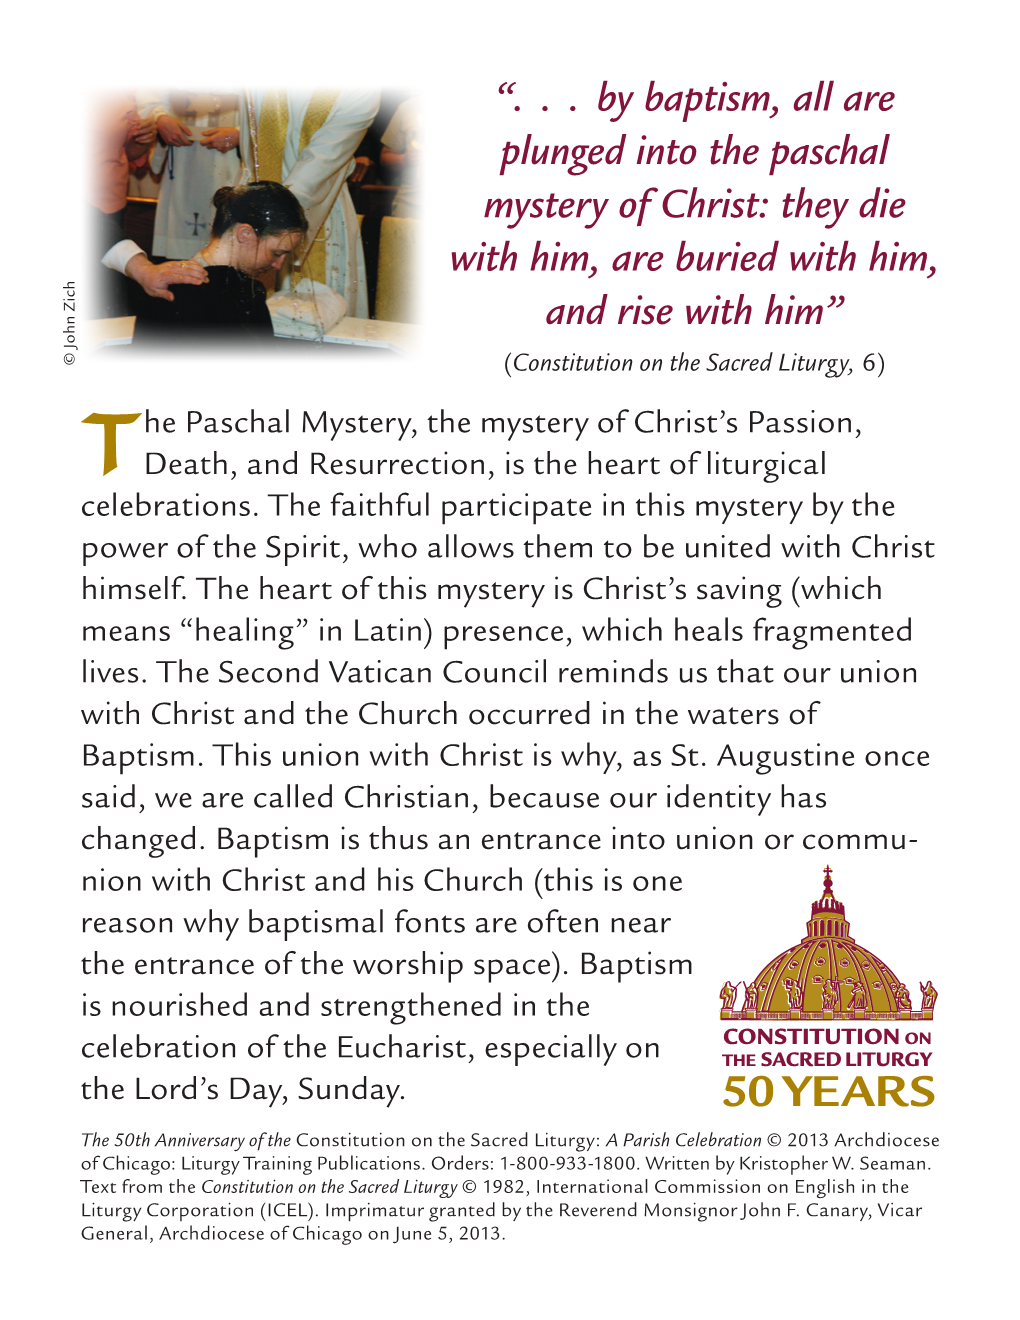 “. . . by Baptism, All Are Plunged Into the Paschal Mystery of Christ: They Die with Him, Are Buried with Him, and Rise with Him”